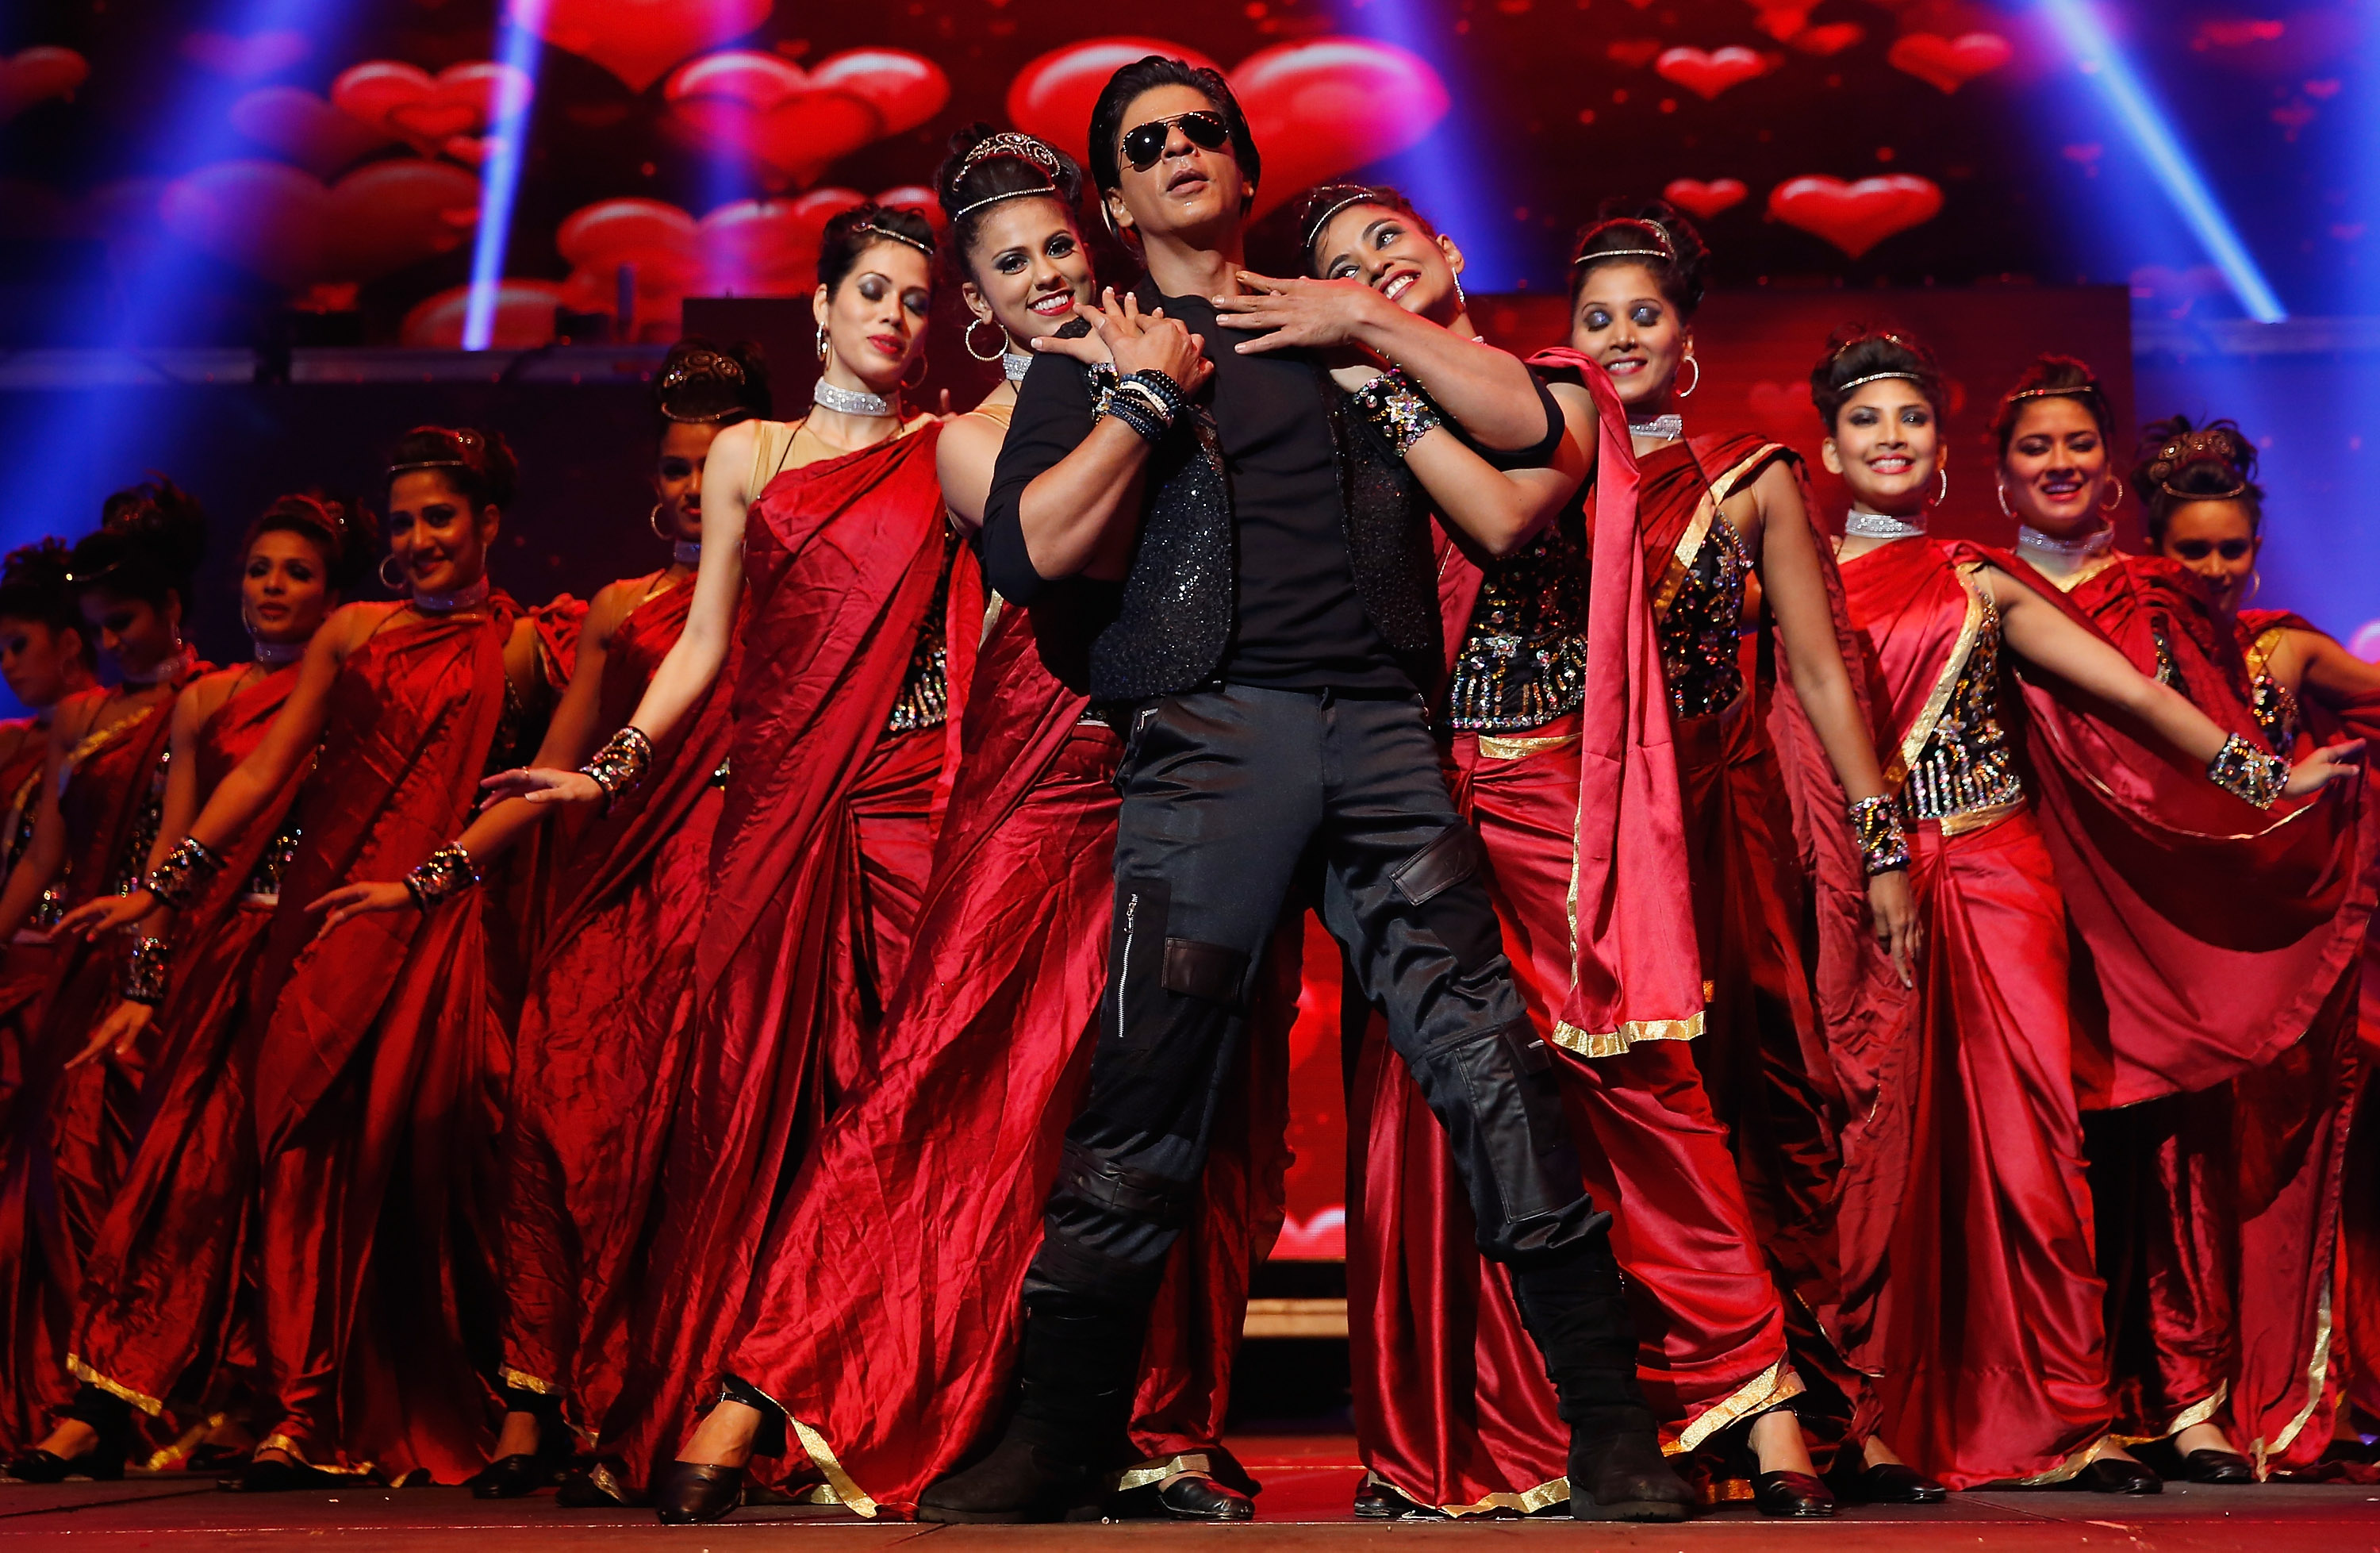 Bollywood actor Shah Rukh Khan onstage wearing dark clothes and sunglasses, flanked by women dancers in red saris. 